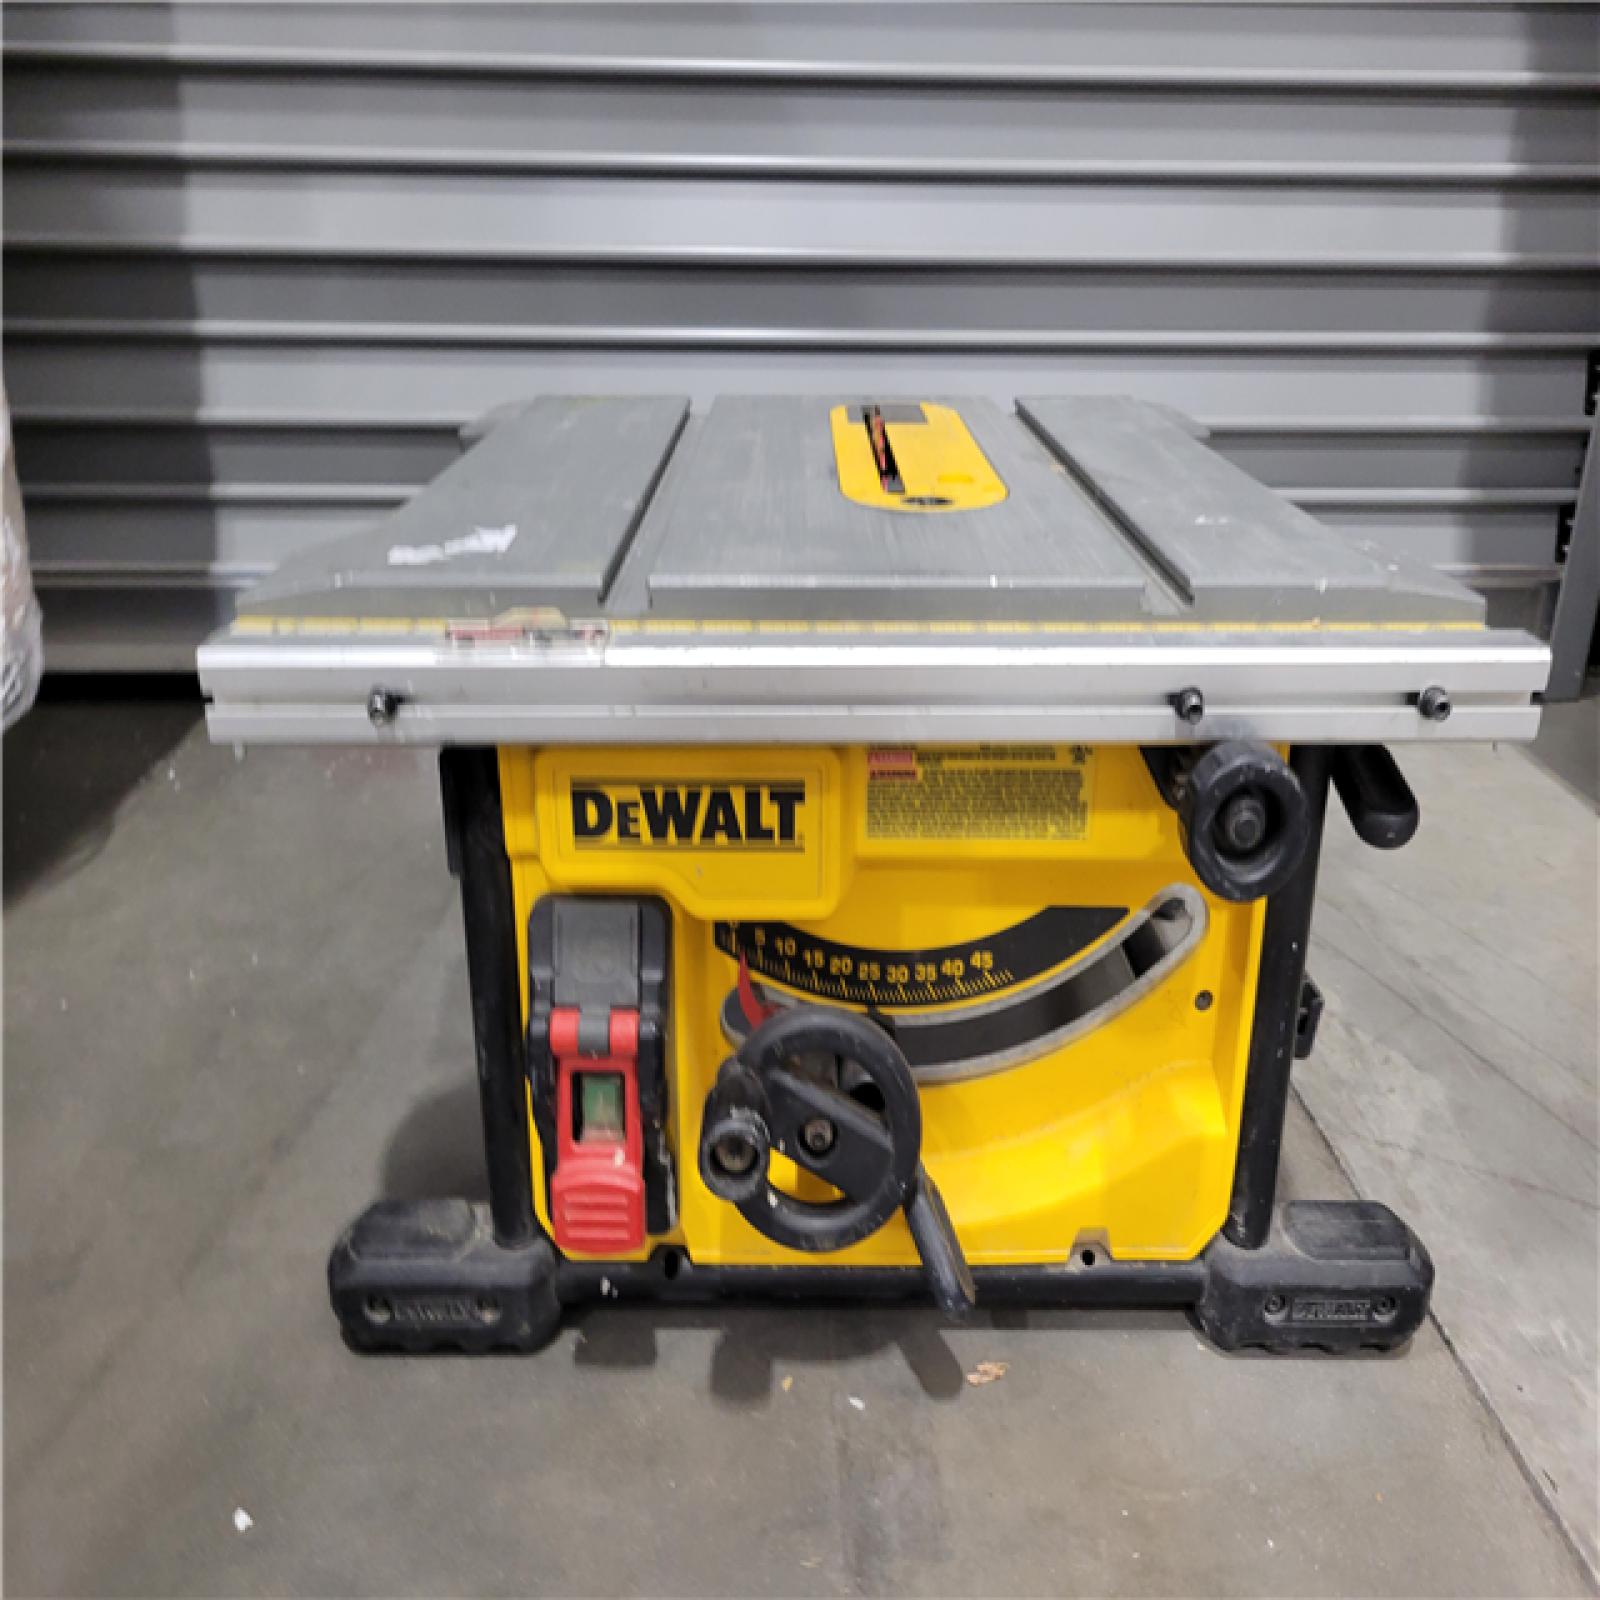 AS-IS DEWALT 15 Amp Corded 8-1/4 in. Compact Portable Jobsite Tablesaw